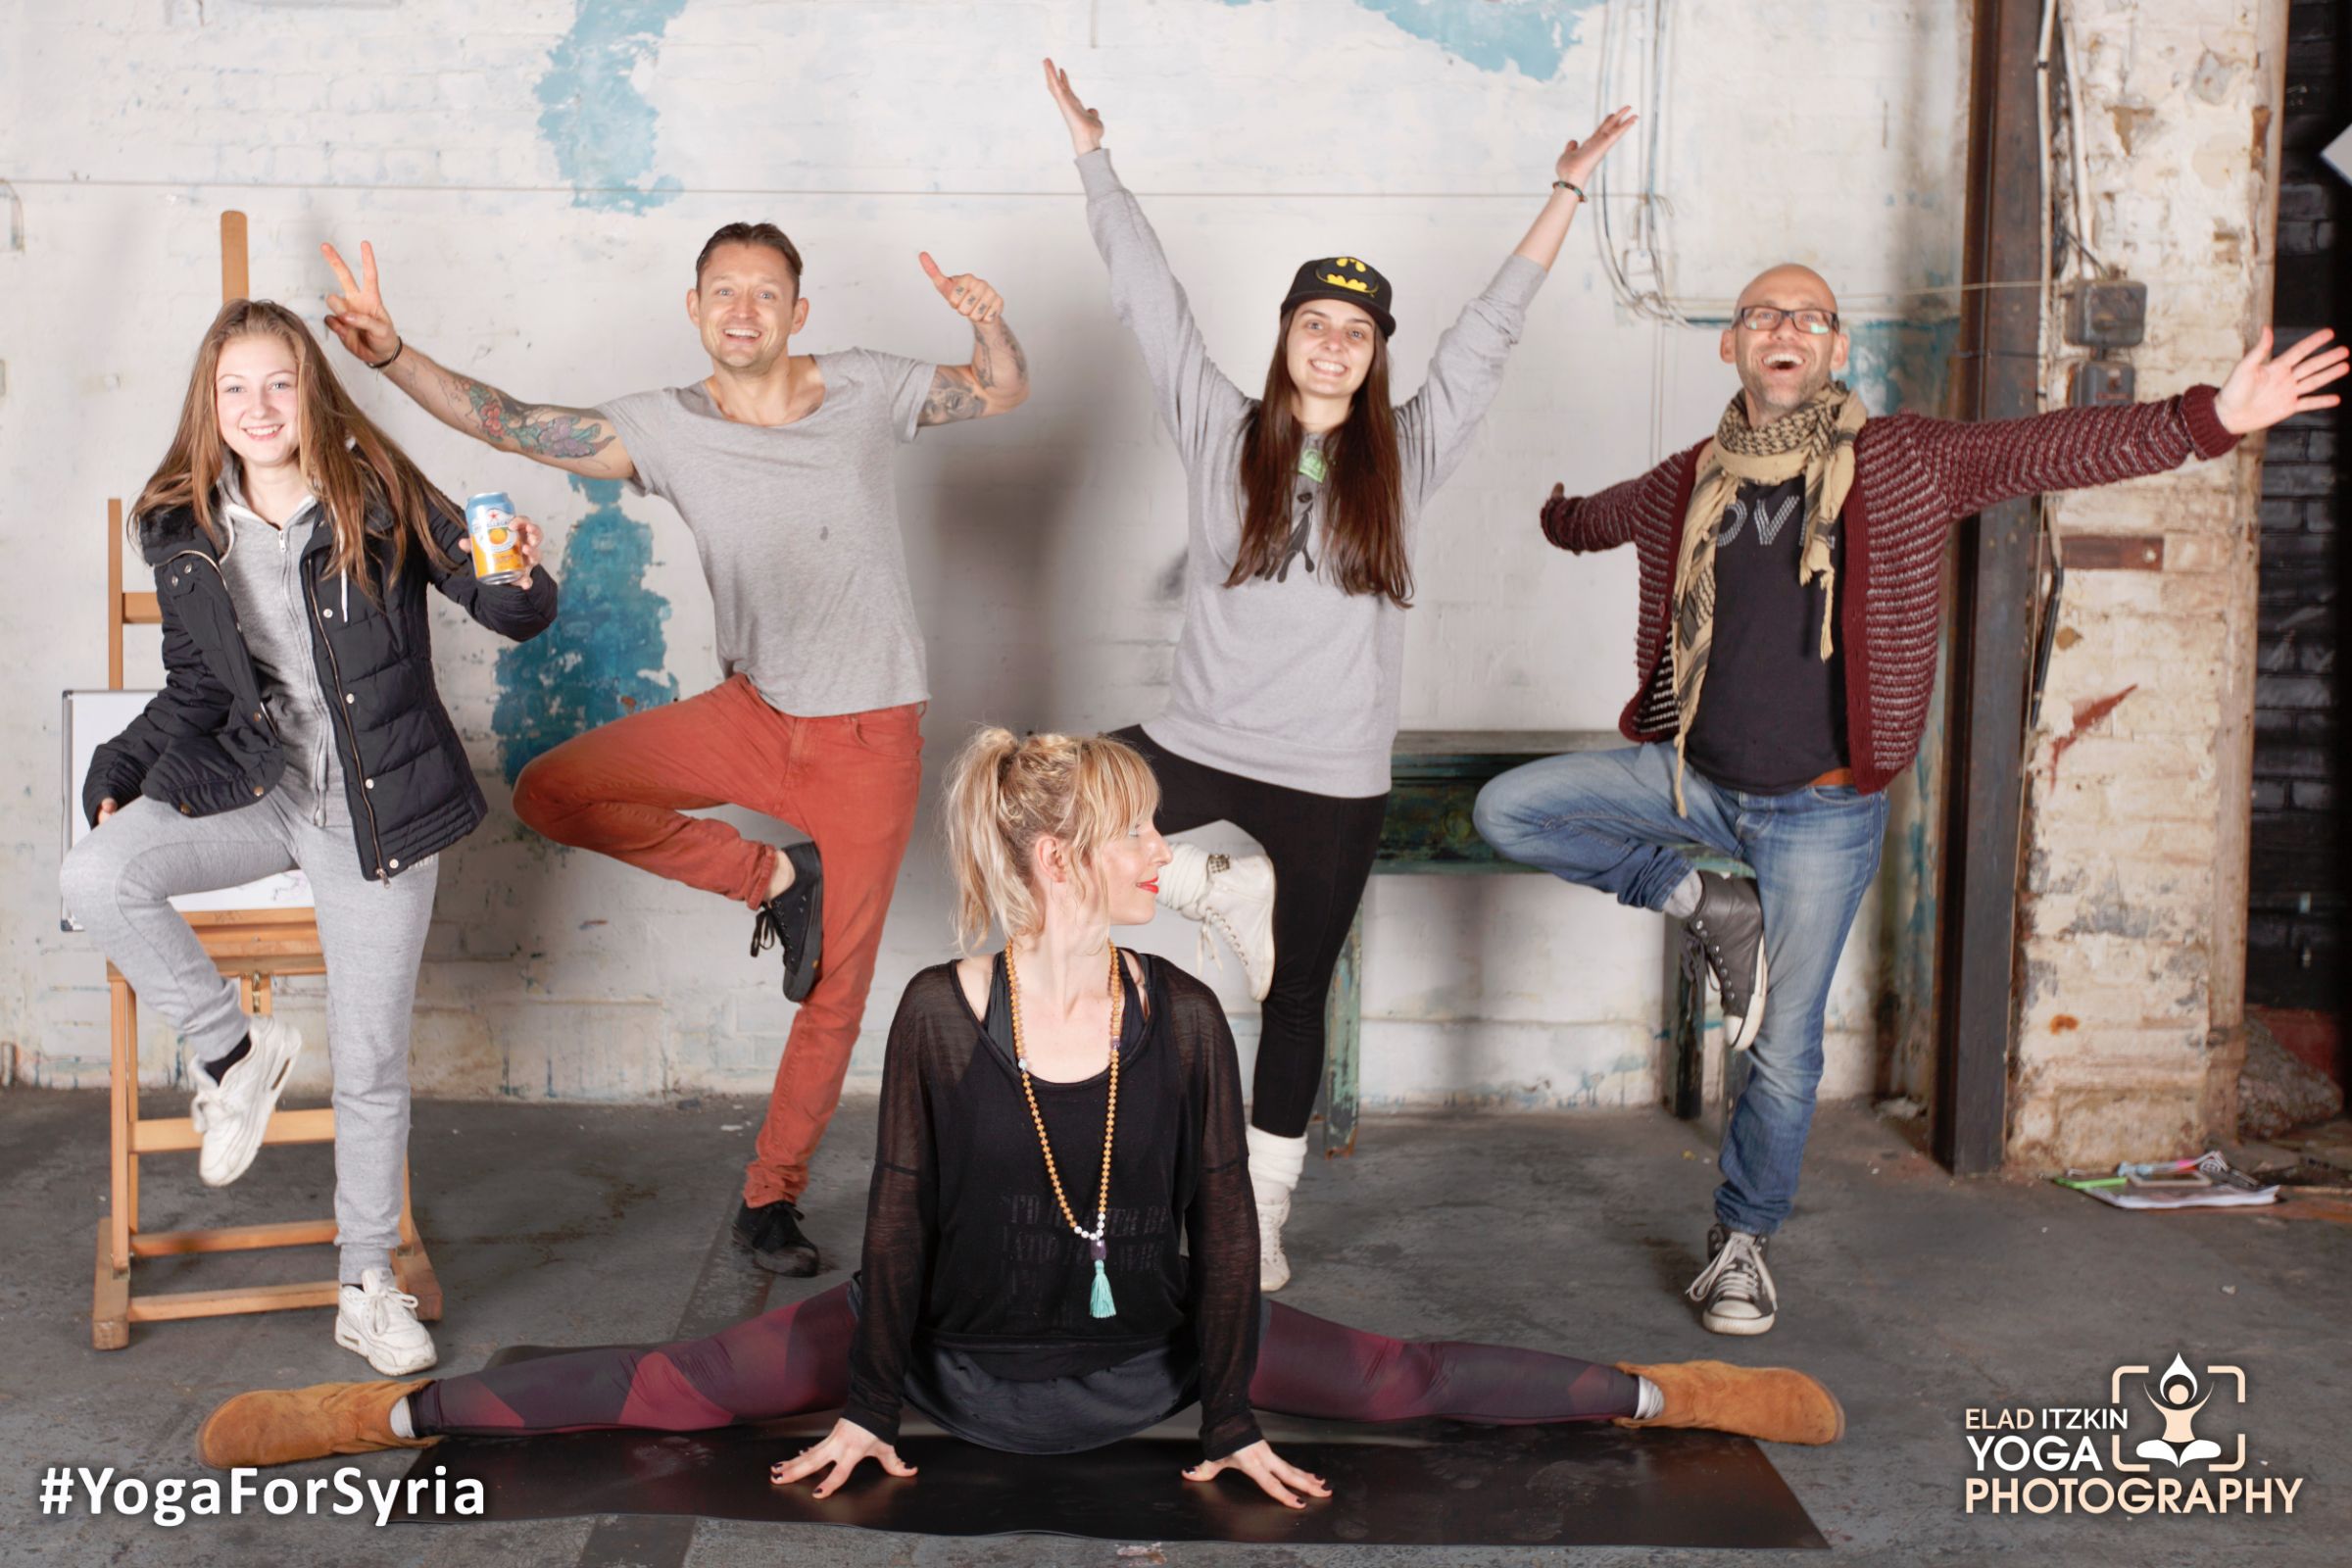 Yoga for Syria event in the Ugly Duck London, November 2015 (#YogaForSyria)